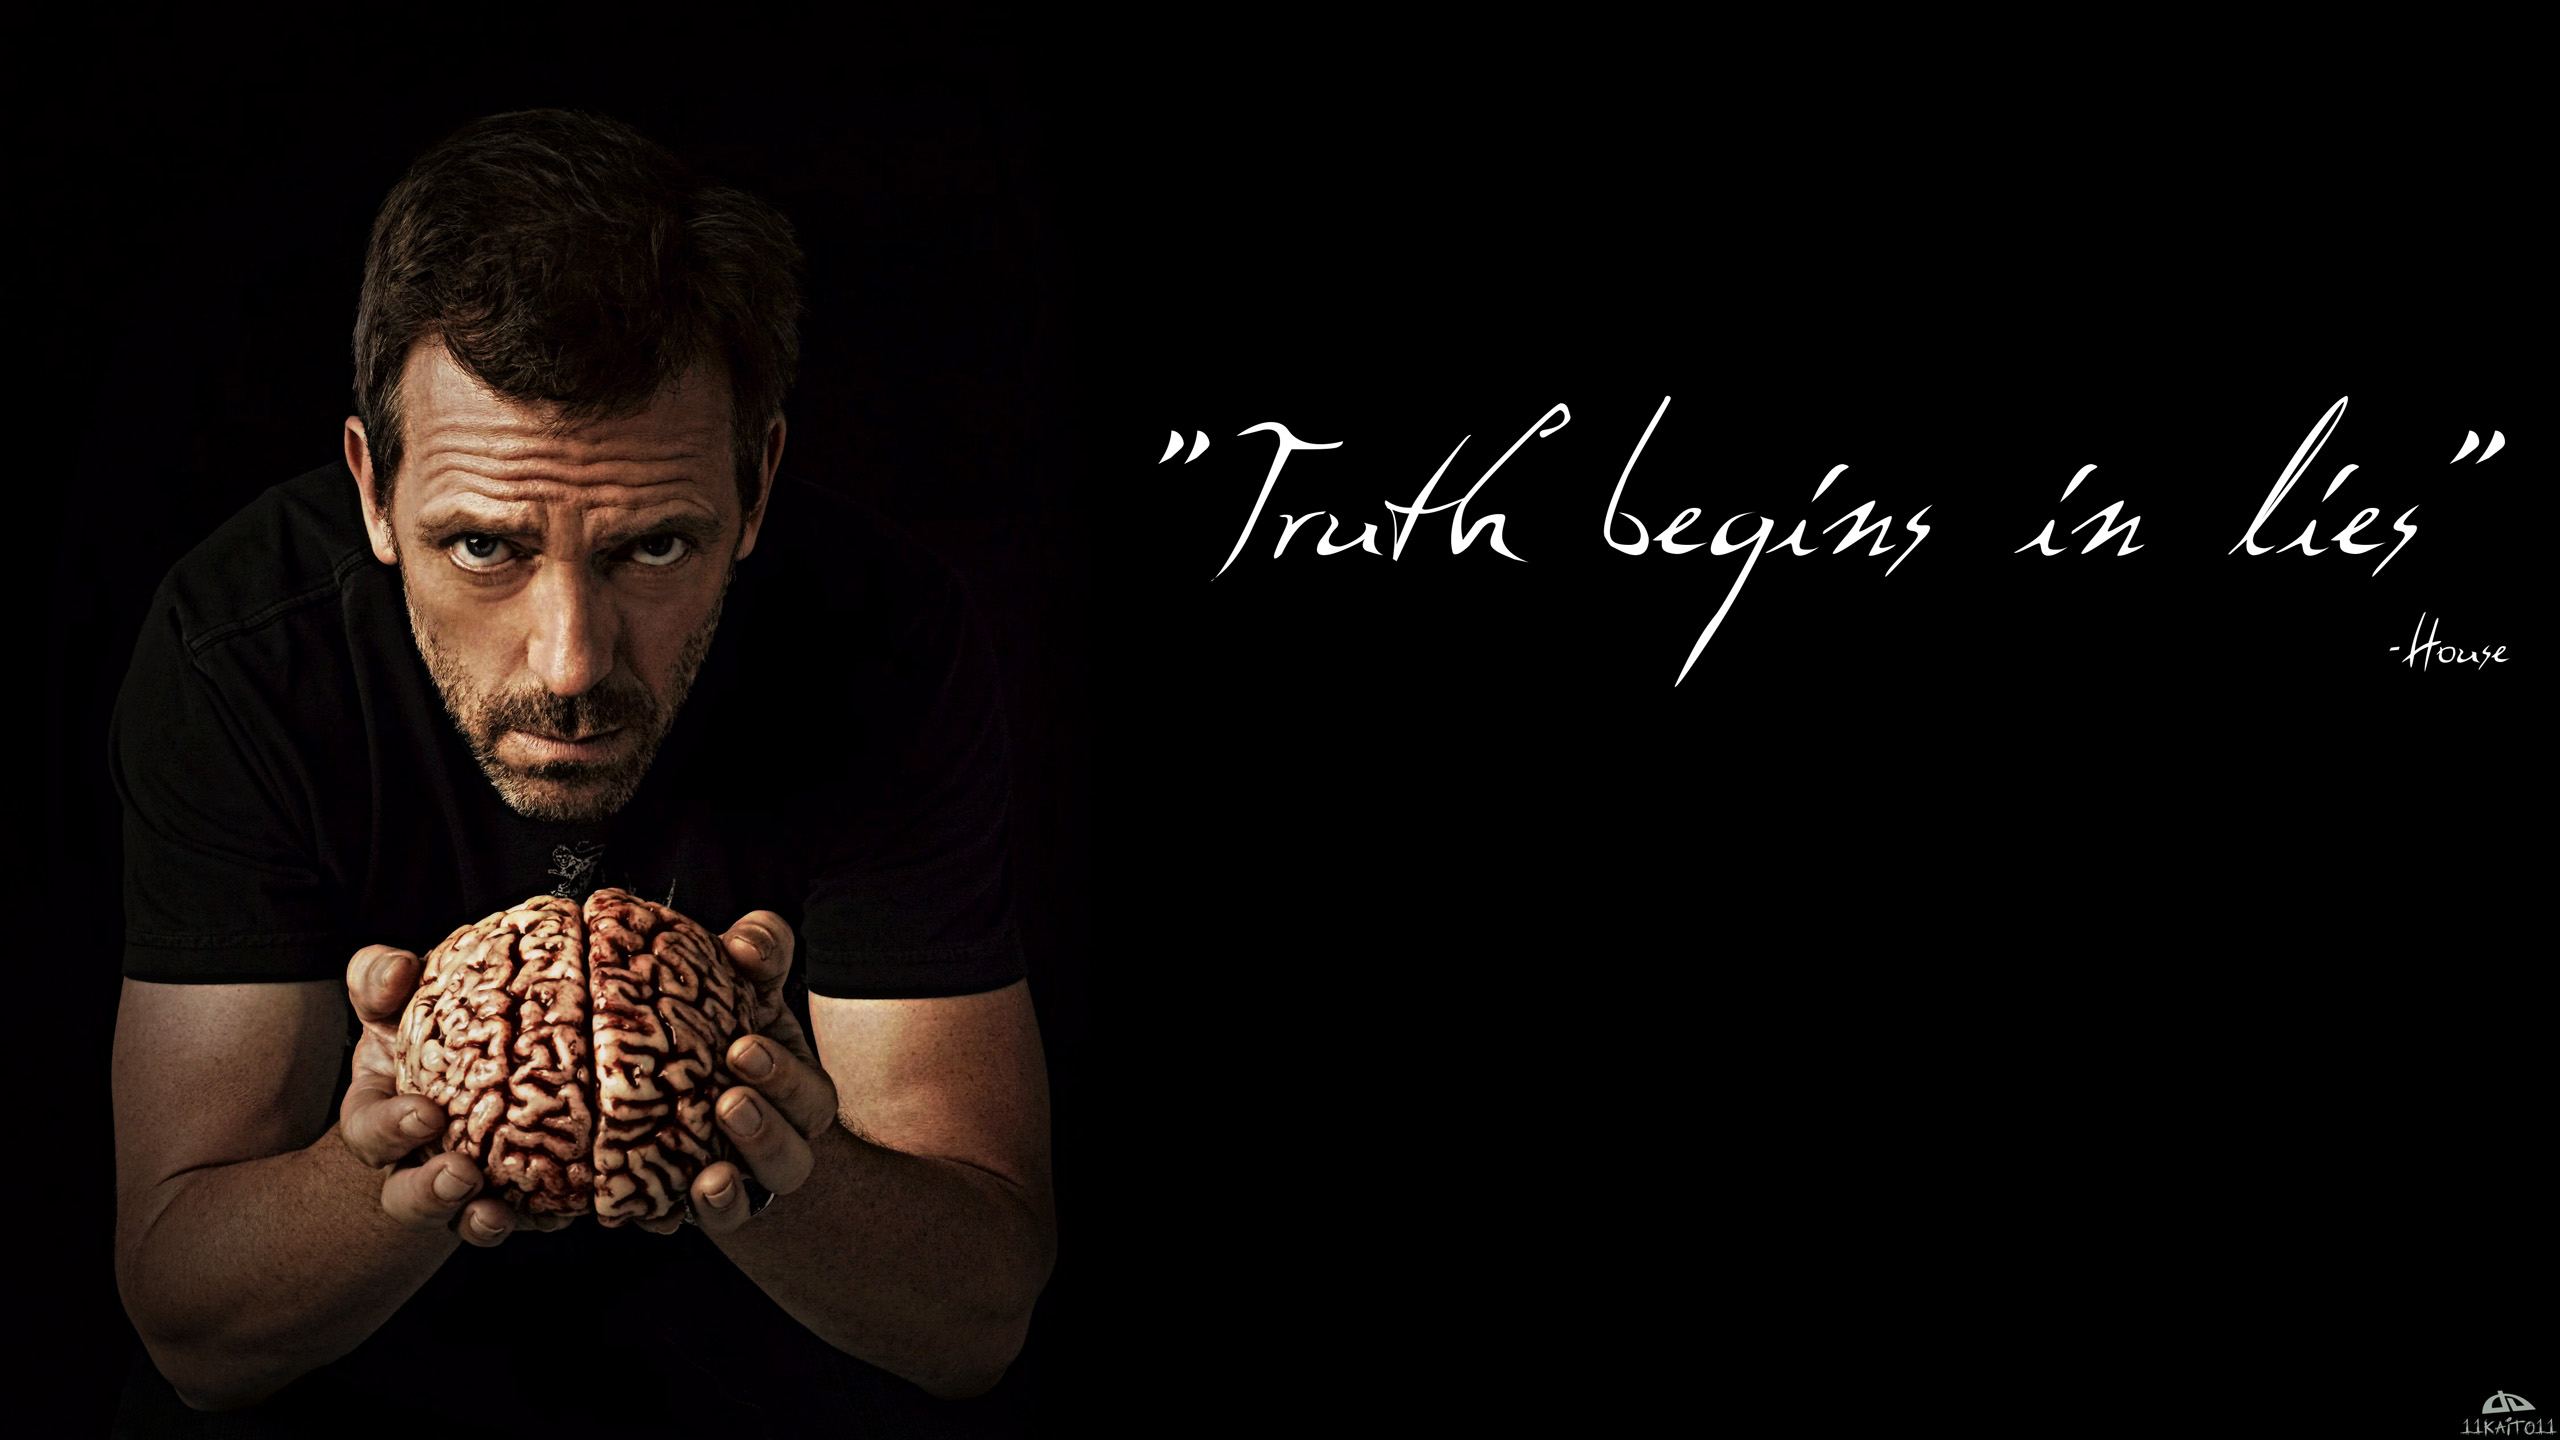 House Md Everybody Lies Everybody Lies - Dr House - HD Wallpaper 